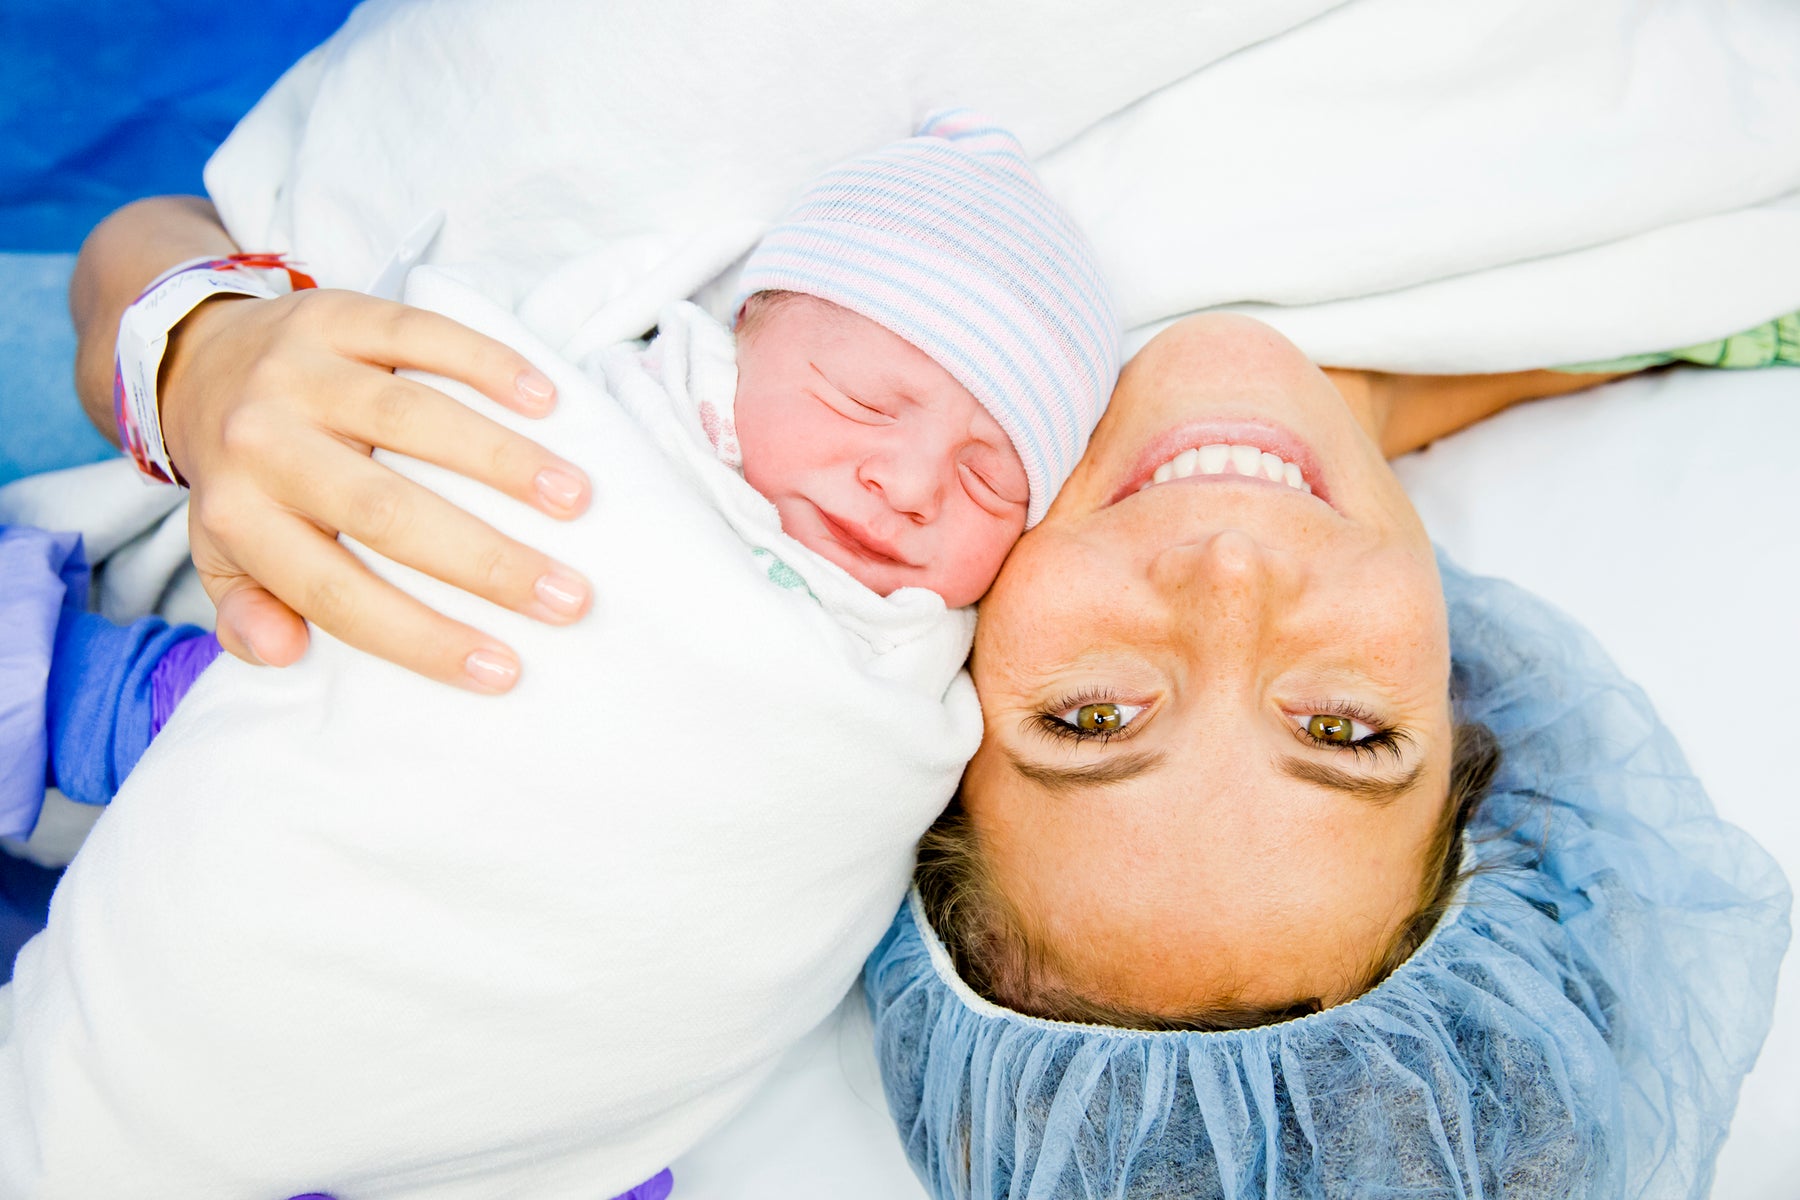 how to make caesarean birth your own